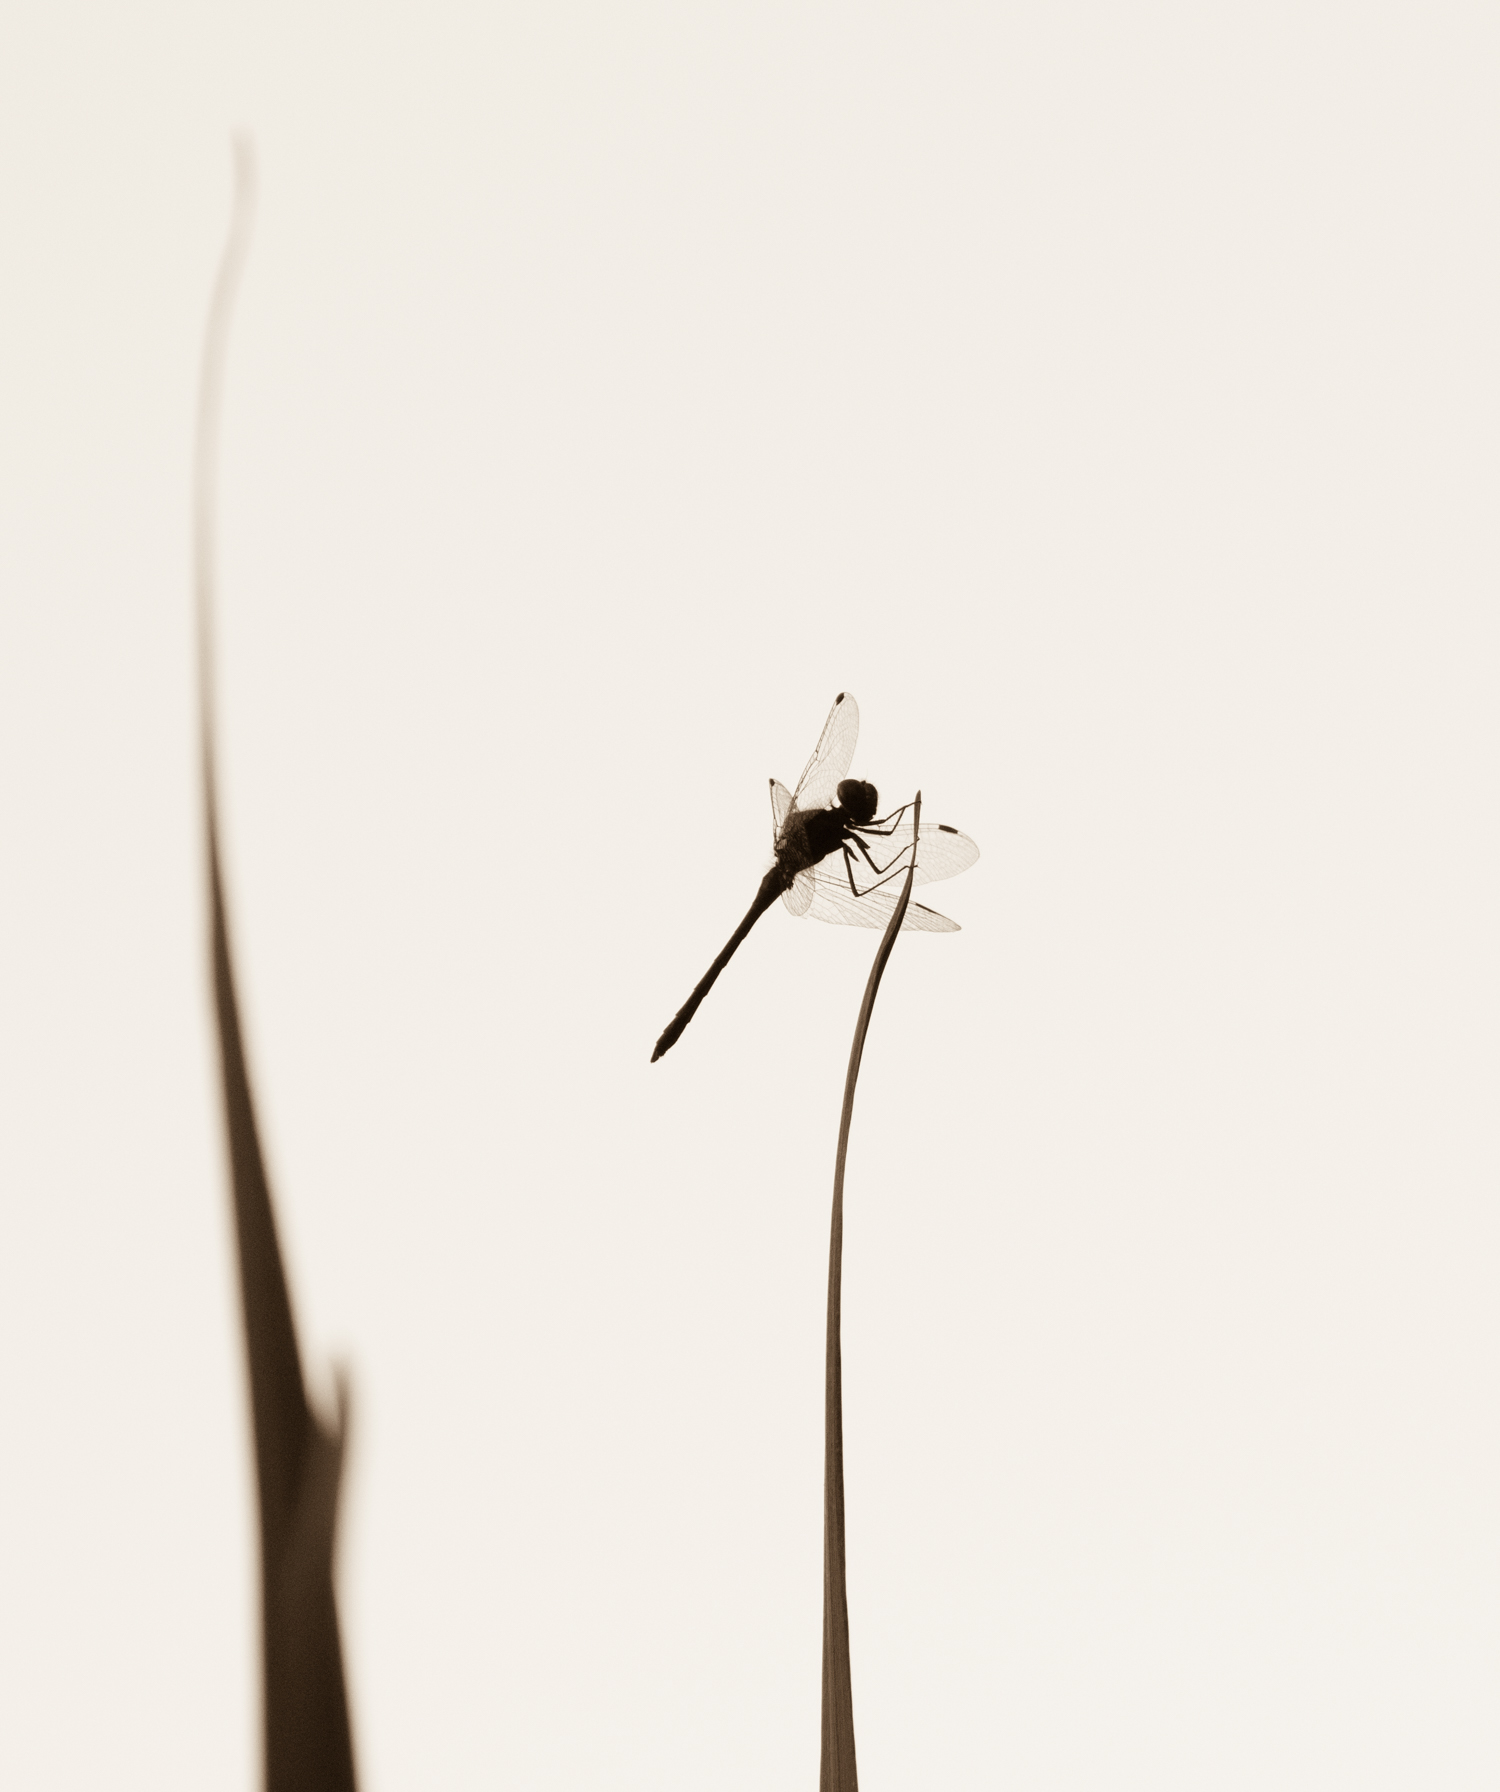  Dragonfly Silhouette 